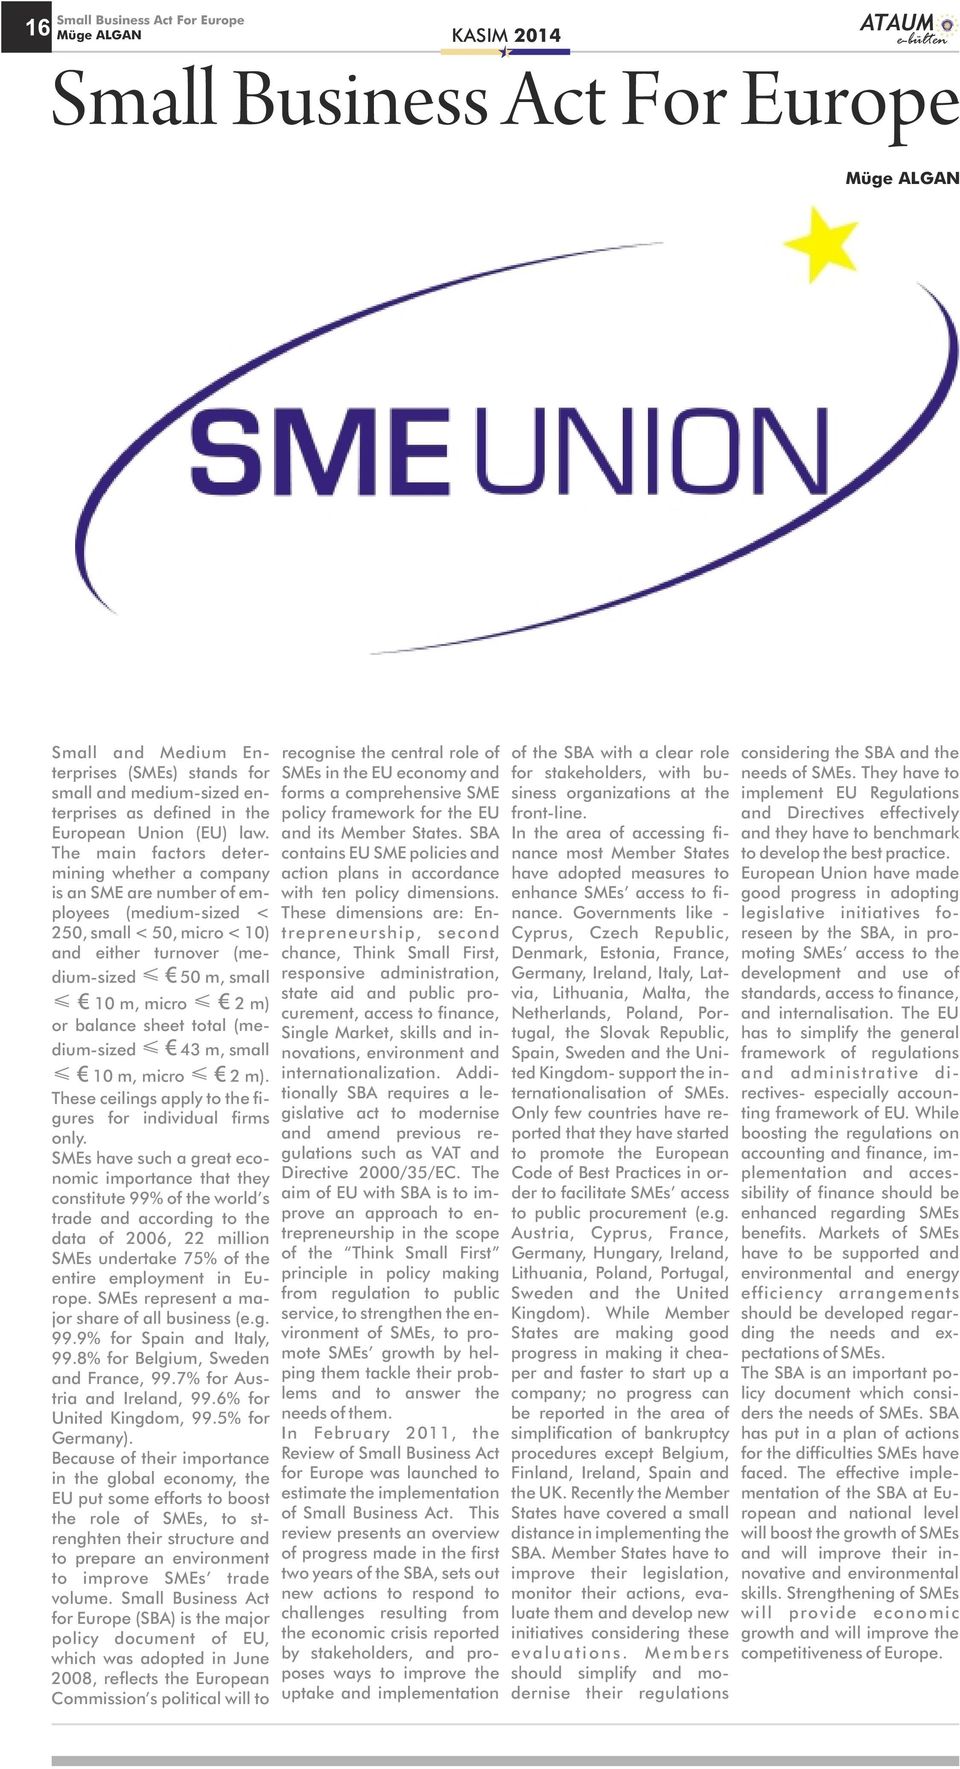 They have to small and medium-sized en- forms a comprehensive SME siness organizations at the implement EU Regulations terprises as defined in the policy framework for the EU front-line.